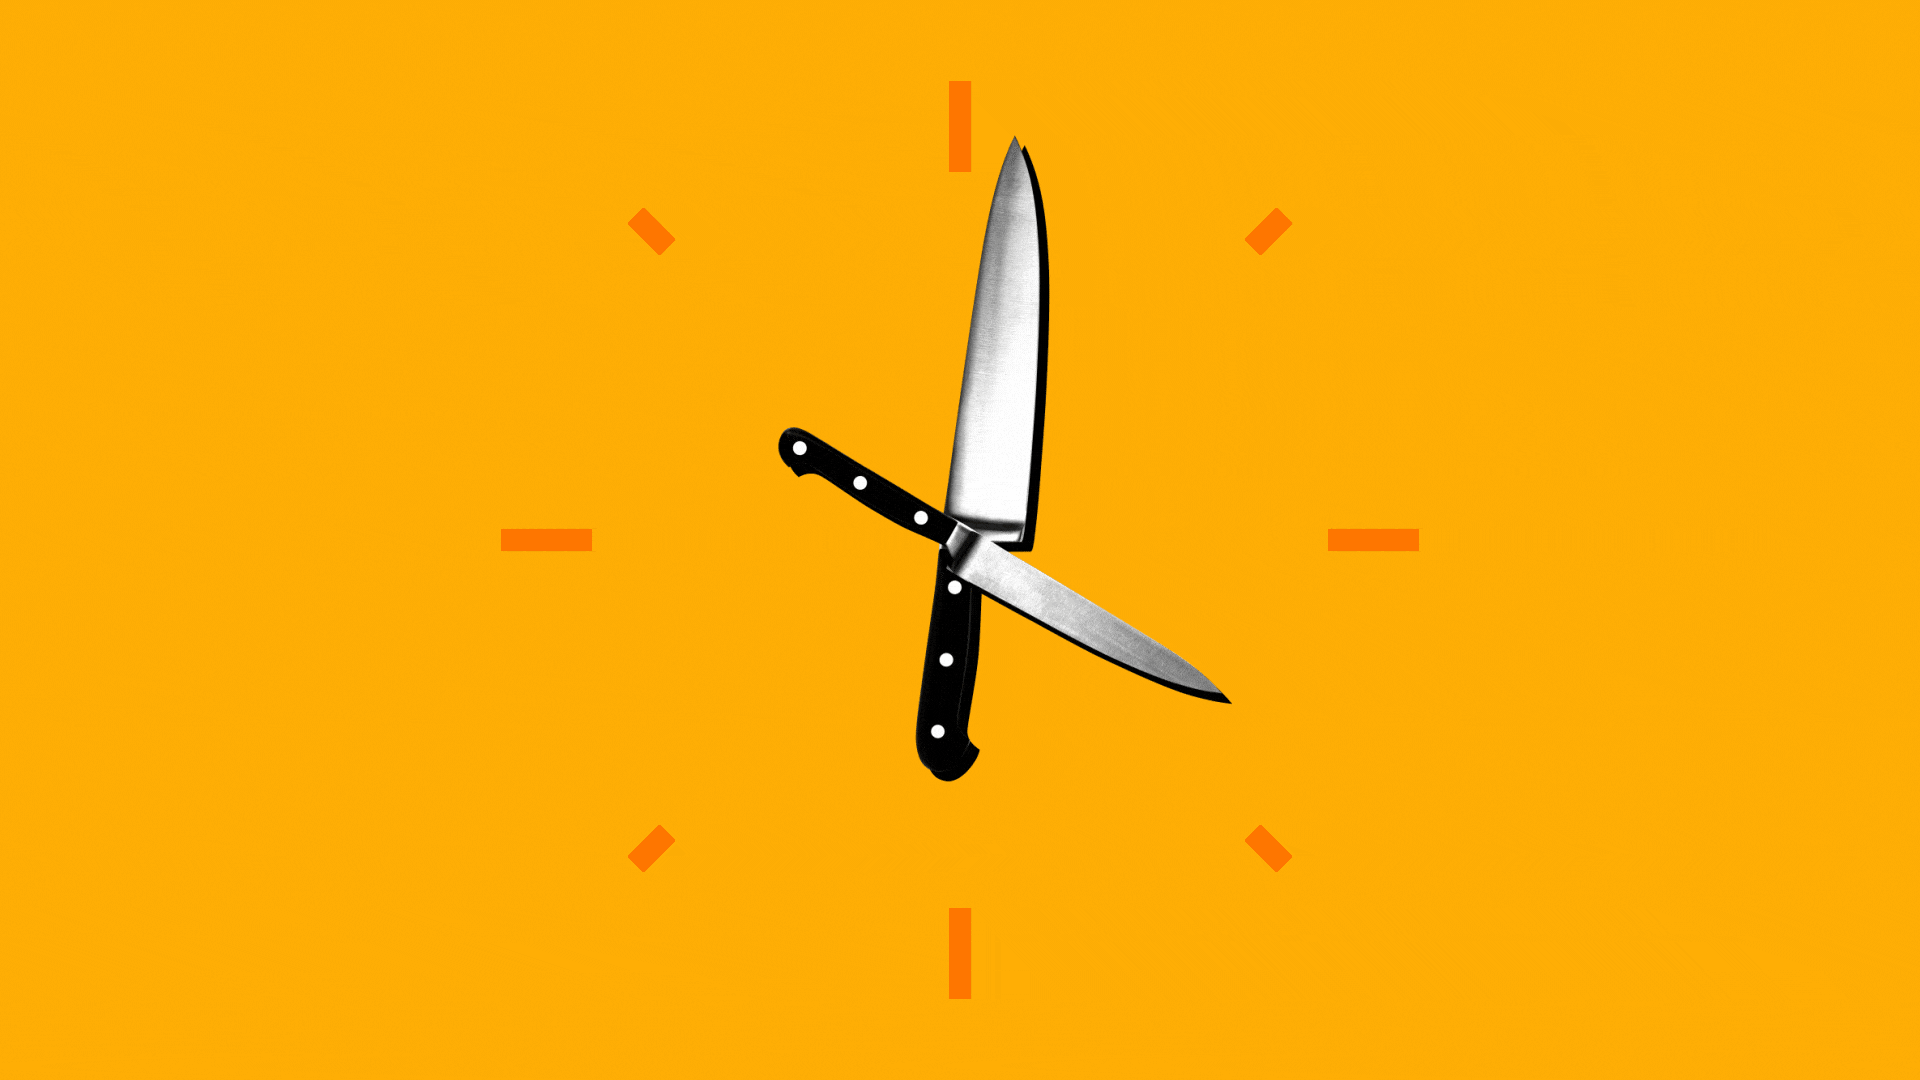 Illustration of a clock with chef's knives for hands.